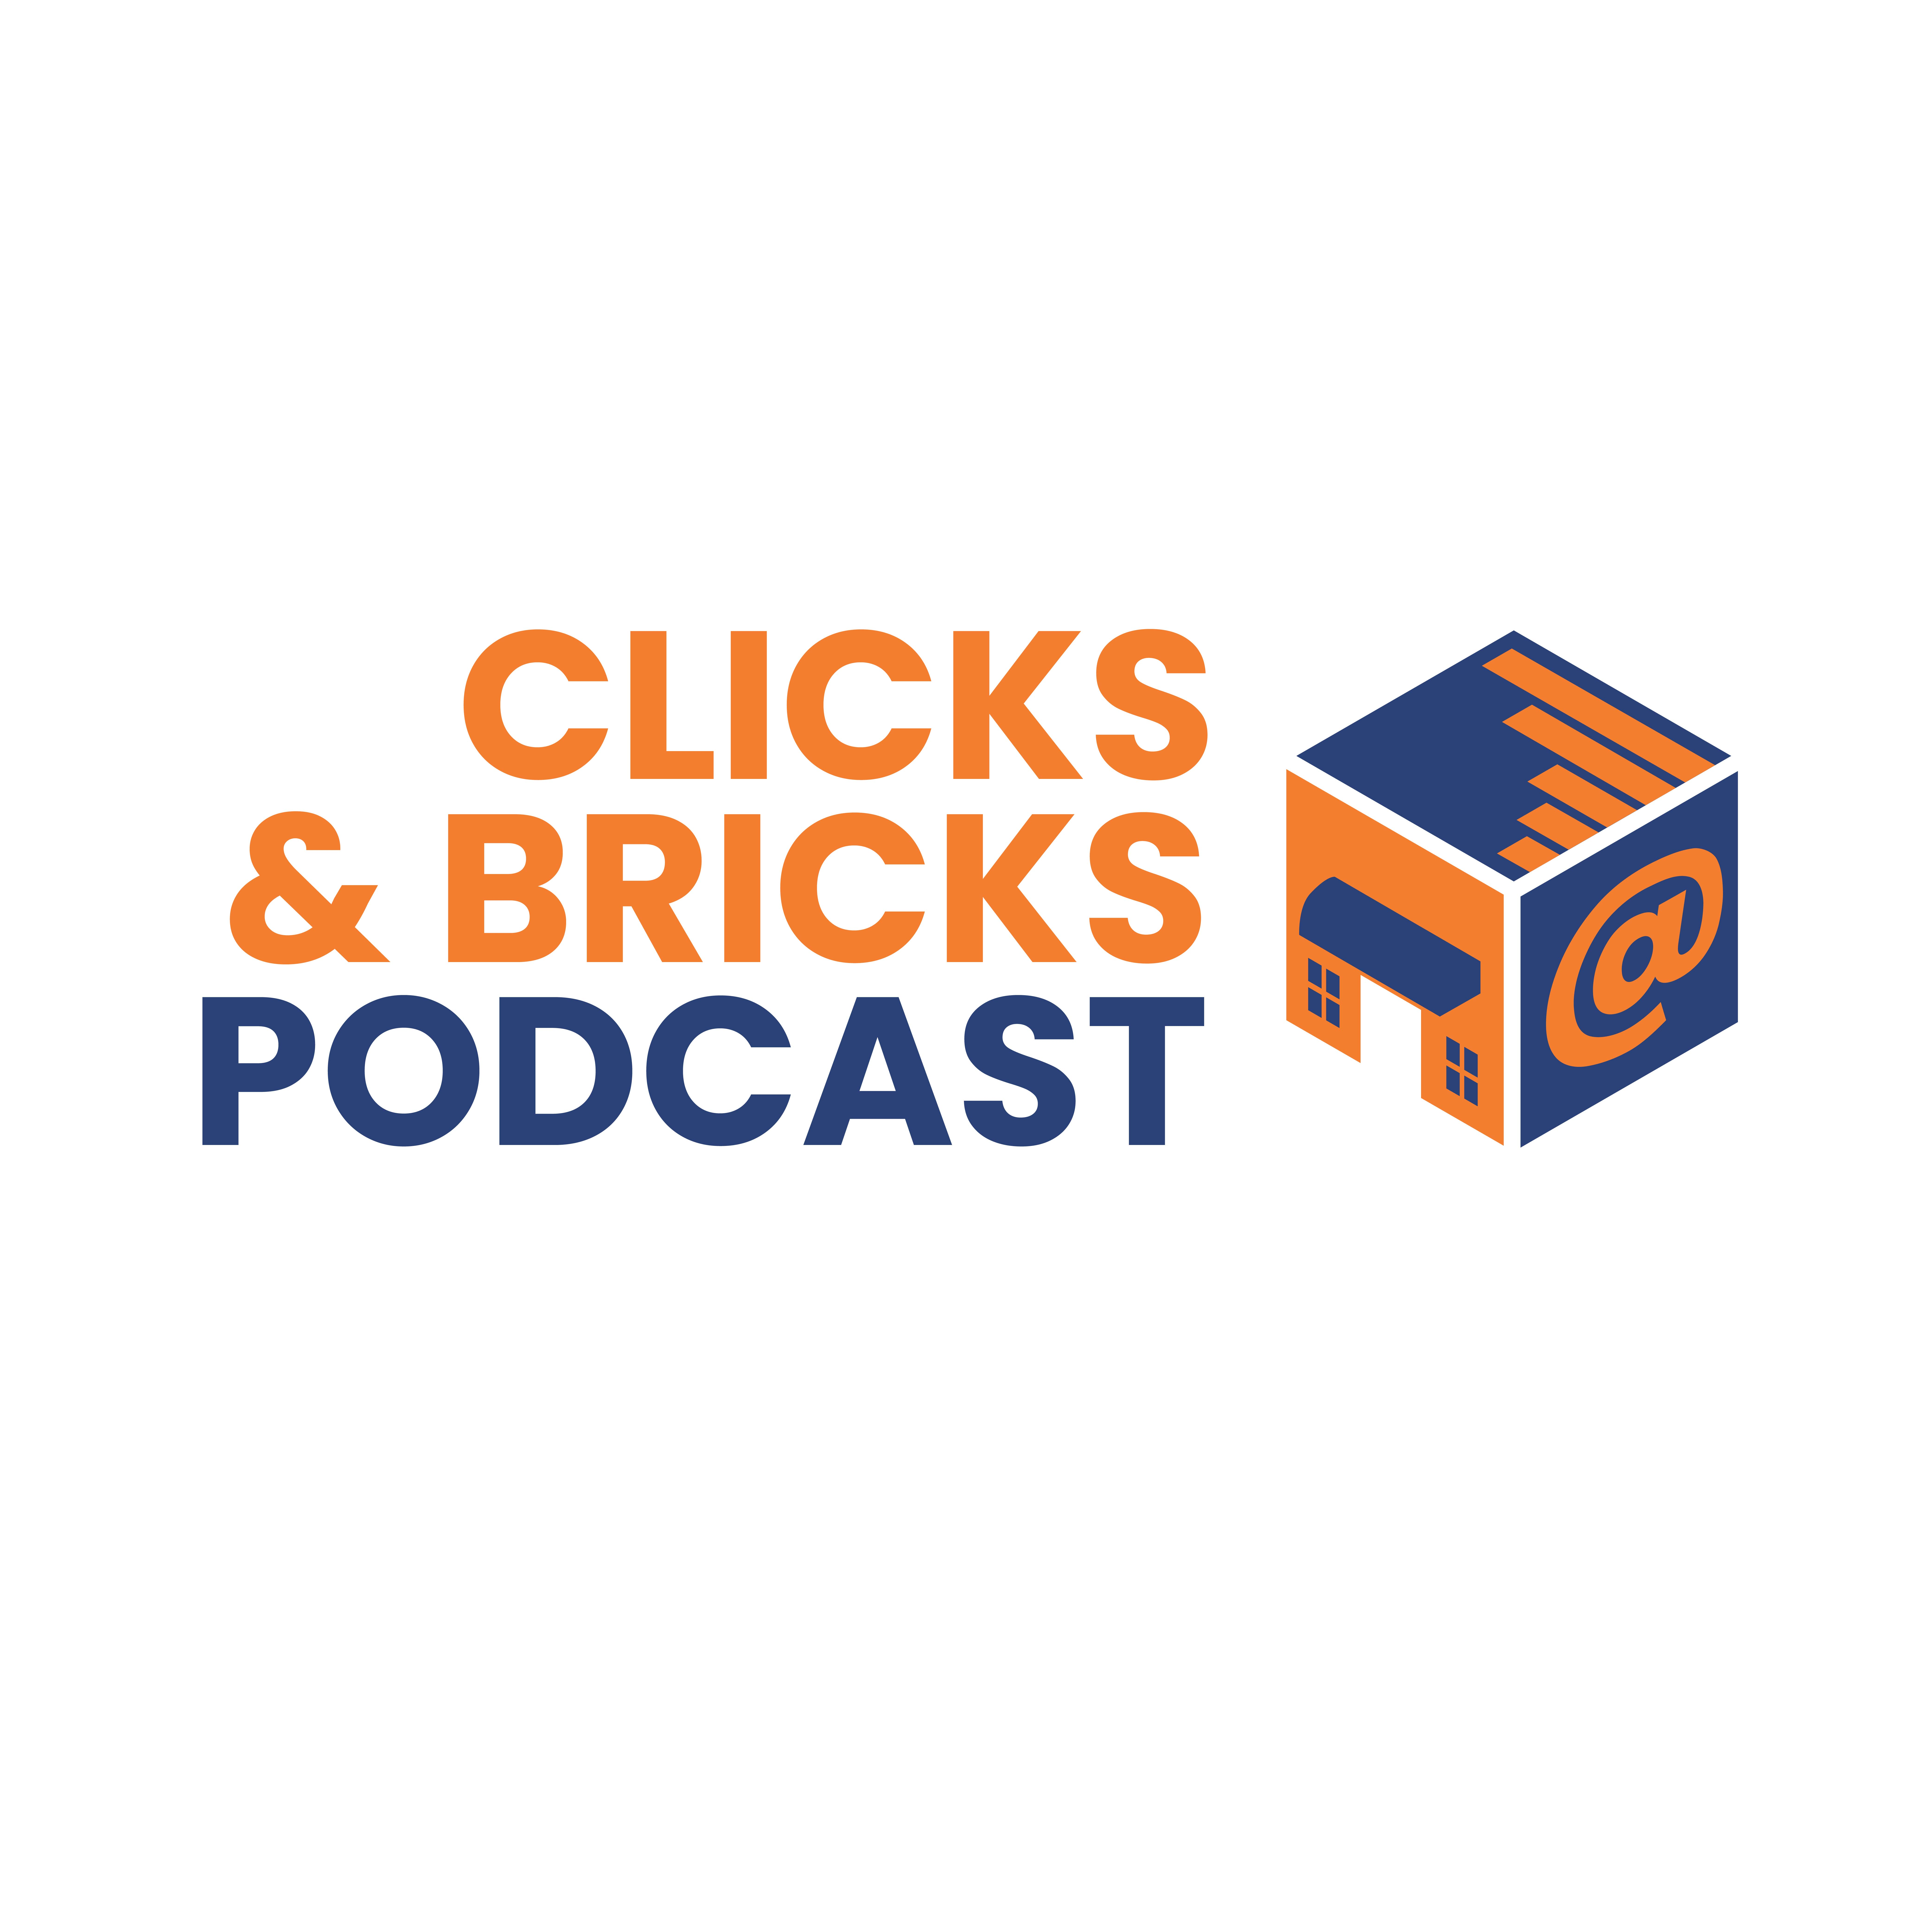 Clicks & Bricks Talks Finances, Wealth Management and More with William Rothrock of the Rothrock Financial Group